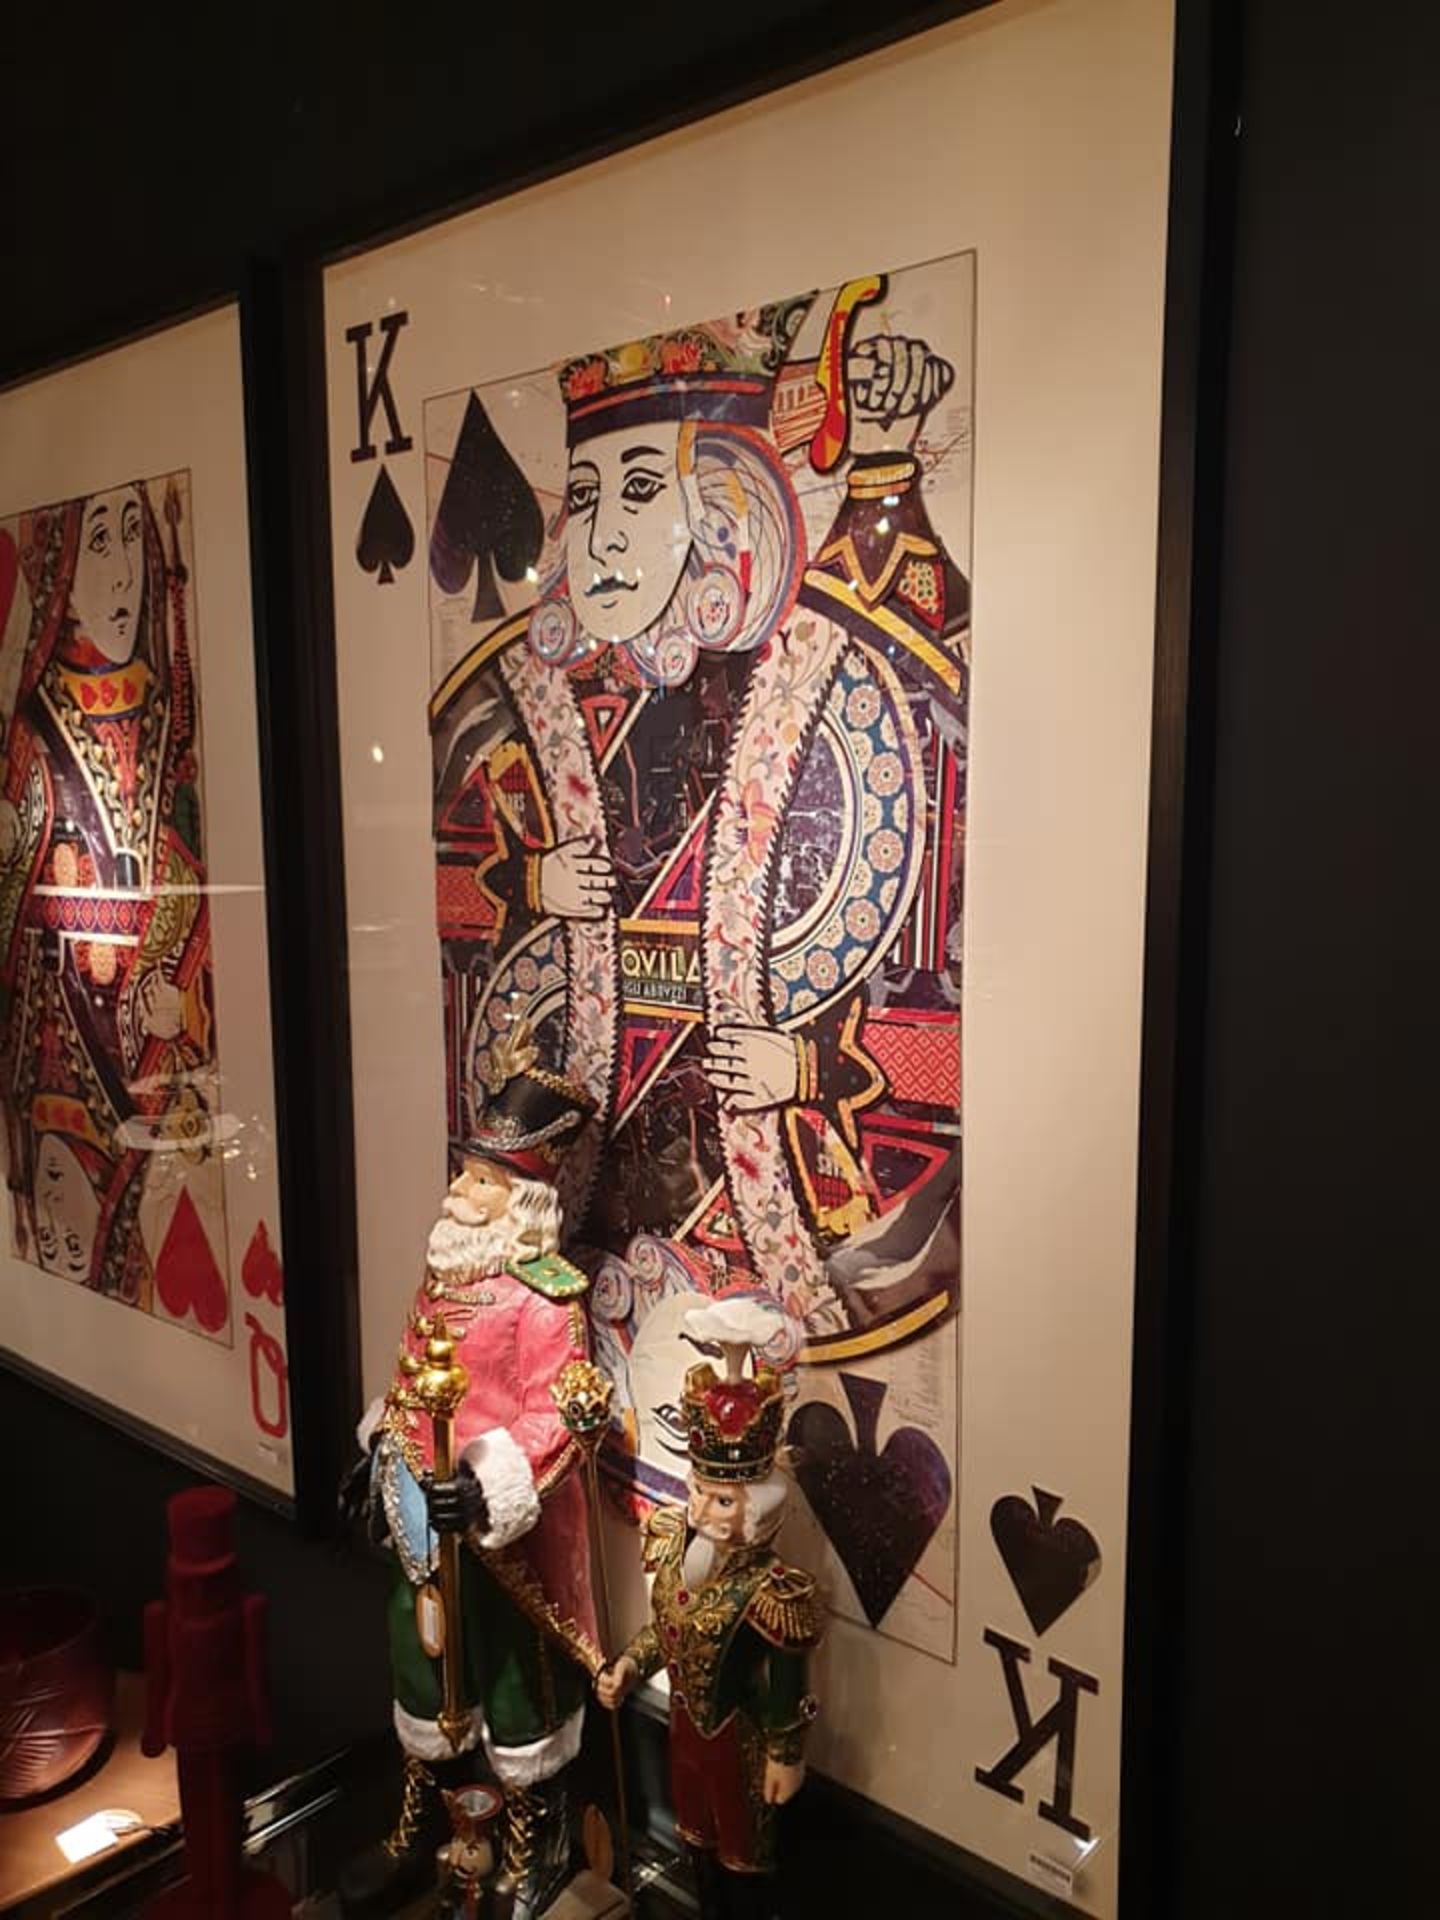 Framed King Of Spades Wall Art Playful And Quirky, This Cards Art Line Is An Enlarged Version Of - Image 2 of 2